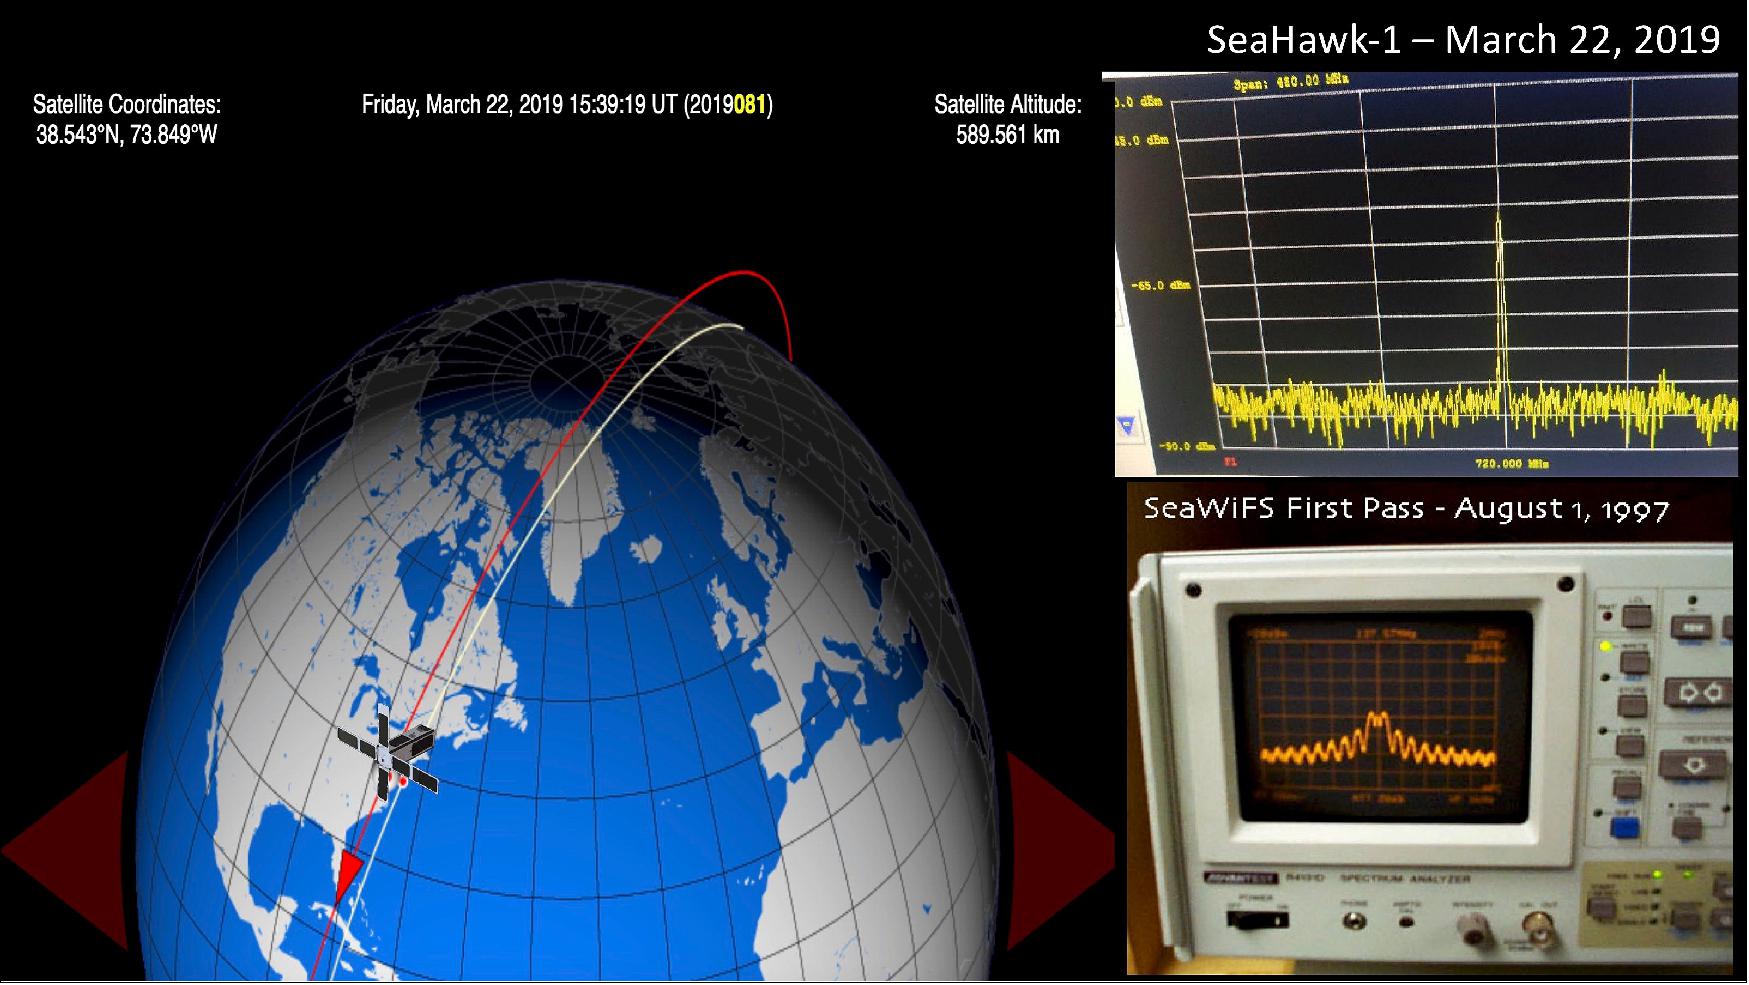 Figure 20: On the left you can see the location of SeaHawk-1 during the overpass and on the right, a picture of the signal received at NASA Wallops. On the bottom right there is a picture of a similar test done during the first overpass of the SeaWiFS mission 22 years earlier! (image credit: NASA)